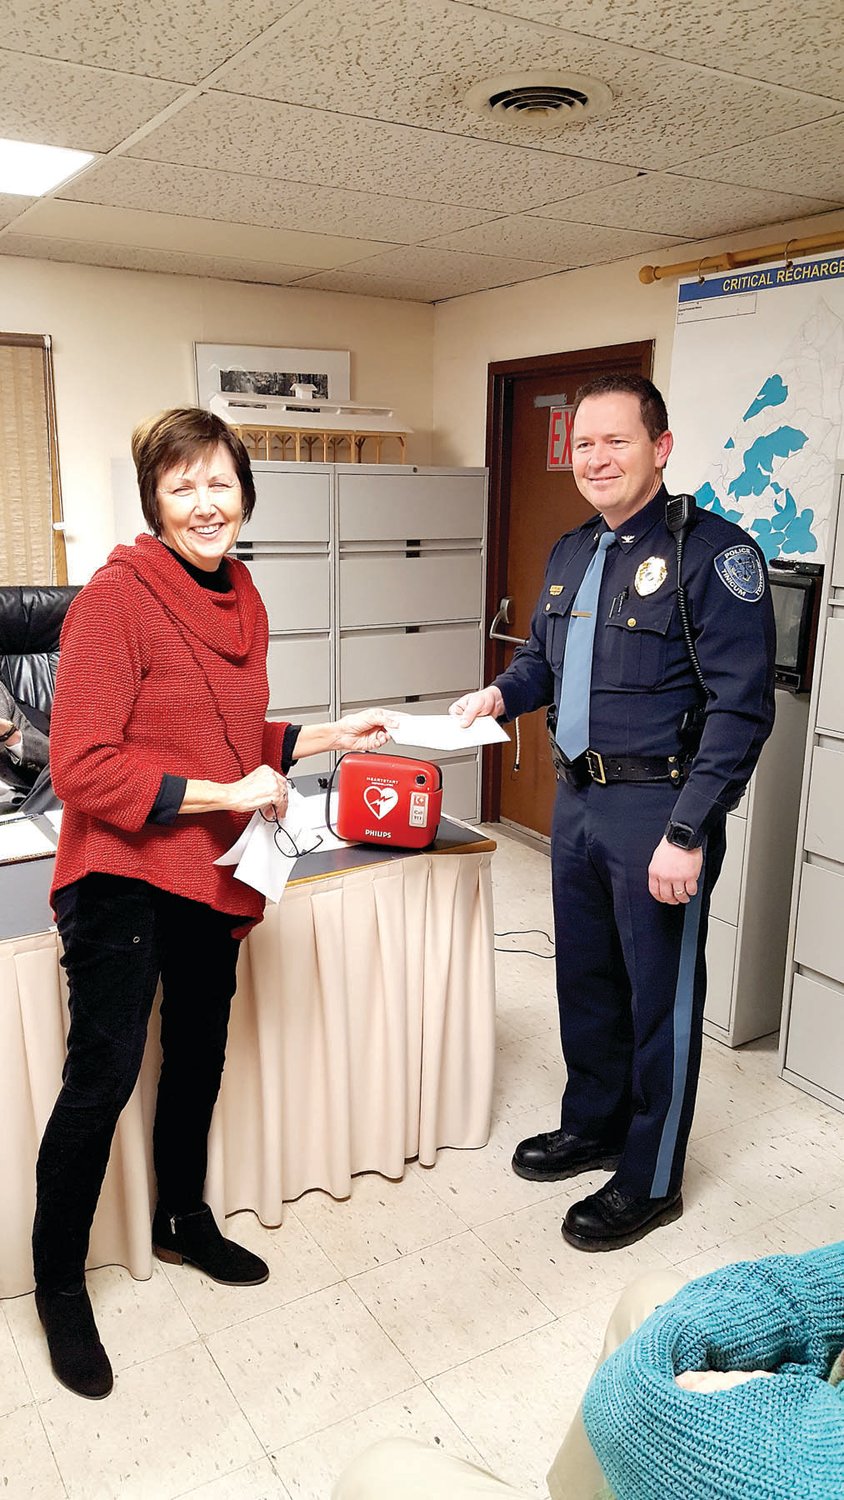 Sue Walsh, president of the Tinicum Civic Association, presented a donation of $1,000 to Tinicum Police Chief Matt Phelan, receiving on behalf of the Tinicum Township Police Foundation, for the purchase of an automated external defibrillator (A.E.D.) for the township police department. Photograph by Cliff Lebowitz